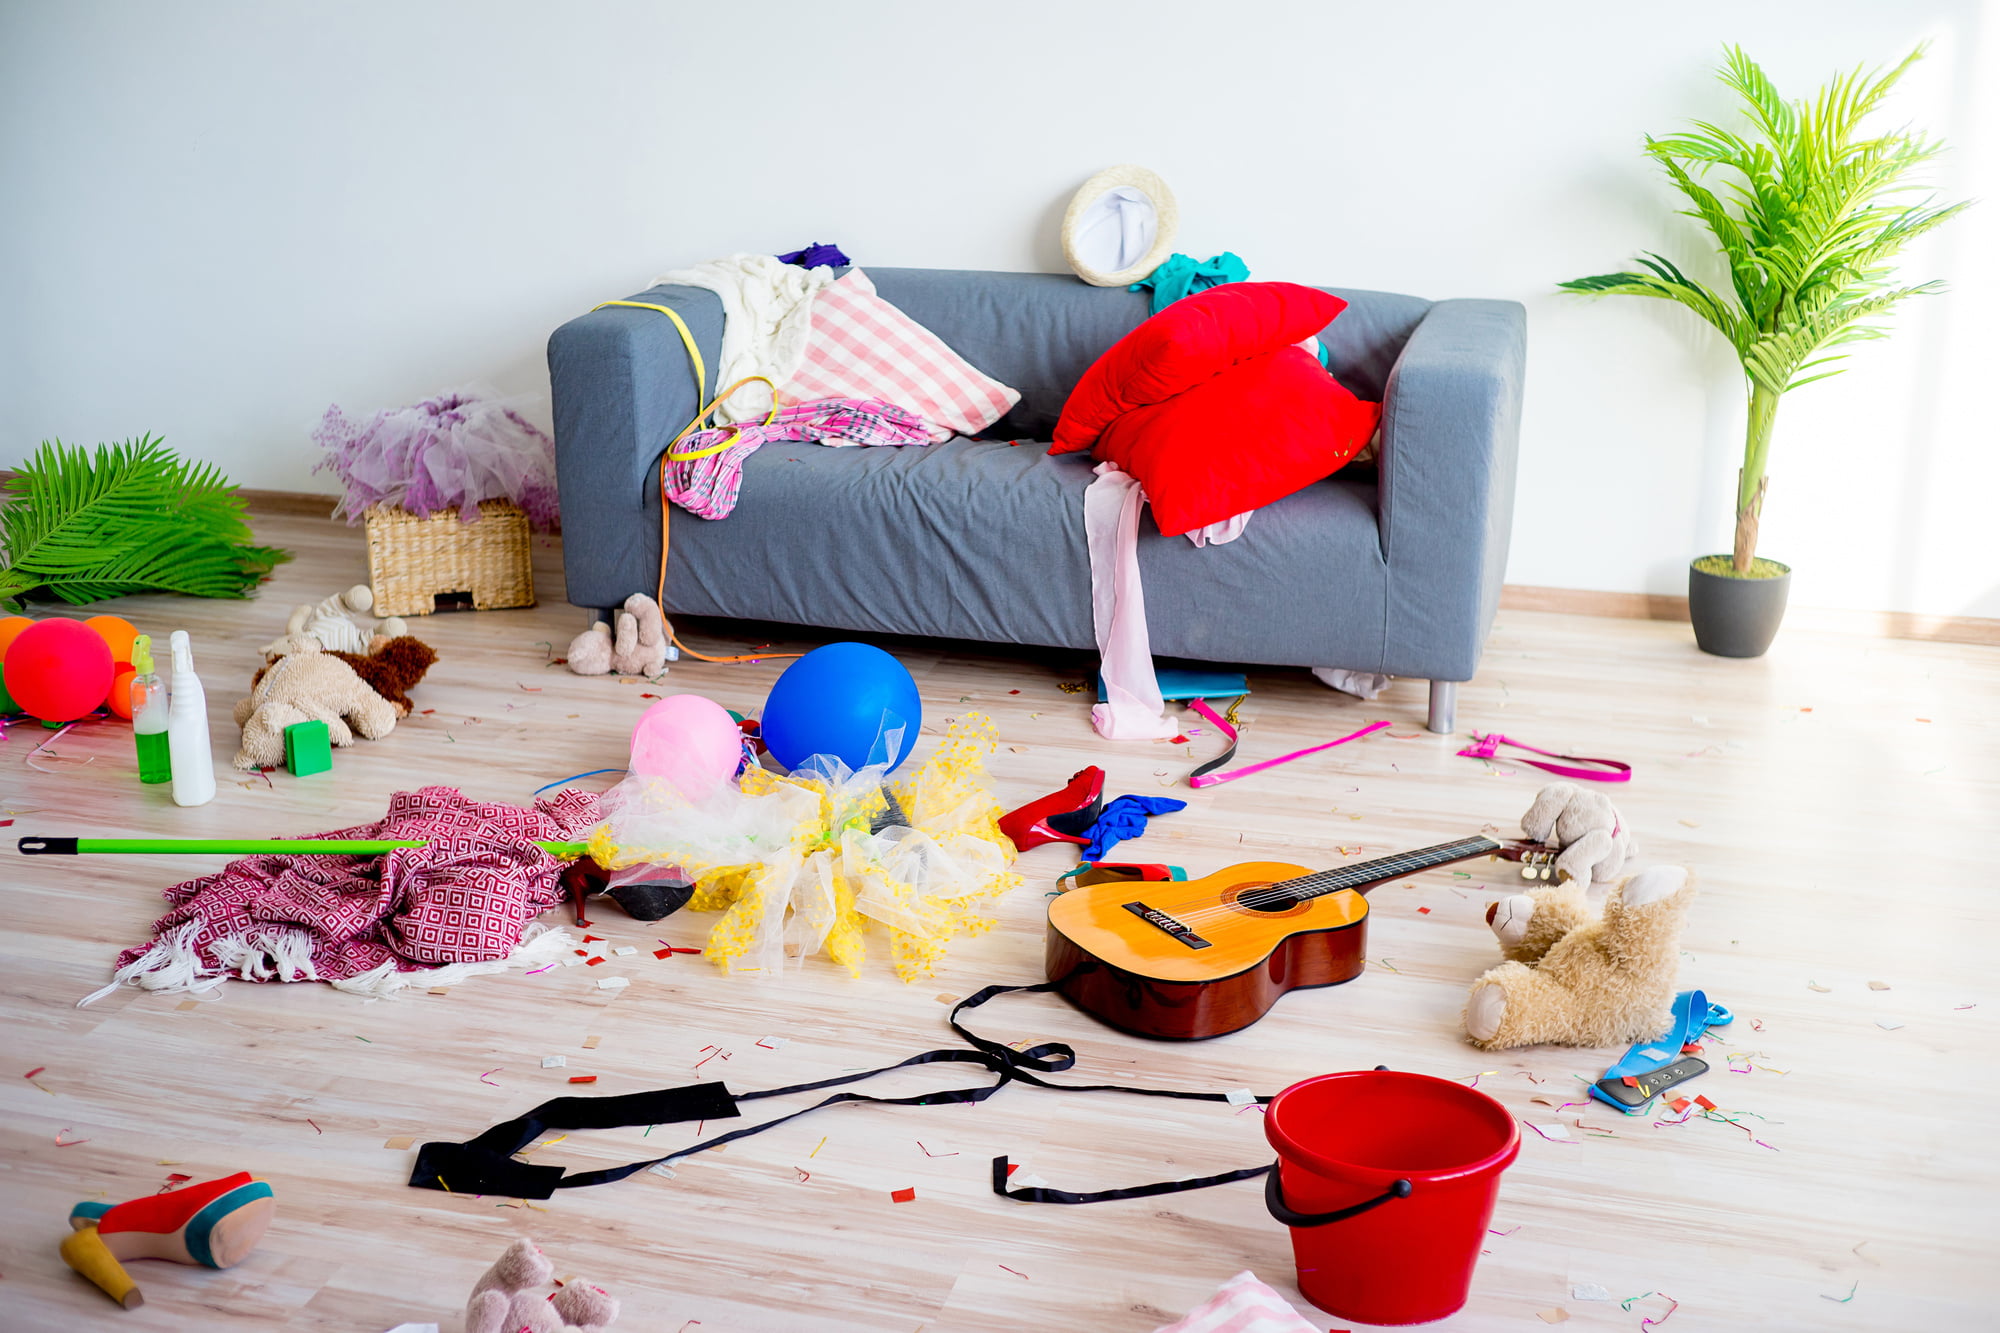 Is your home swimming in a sea of boxes, unwanted items, and more clutter? Learn how to get rid of clutter in this homeowner's guide.